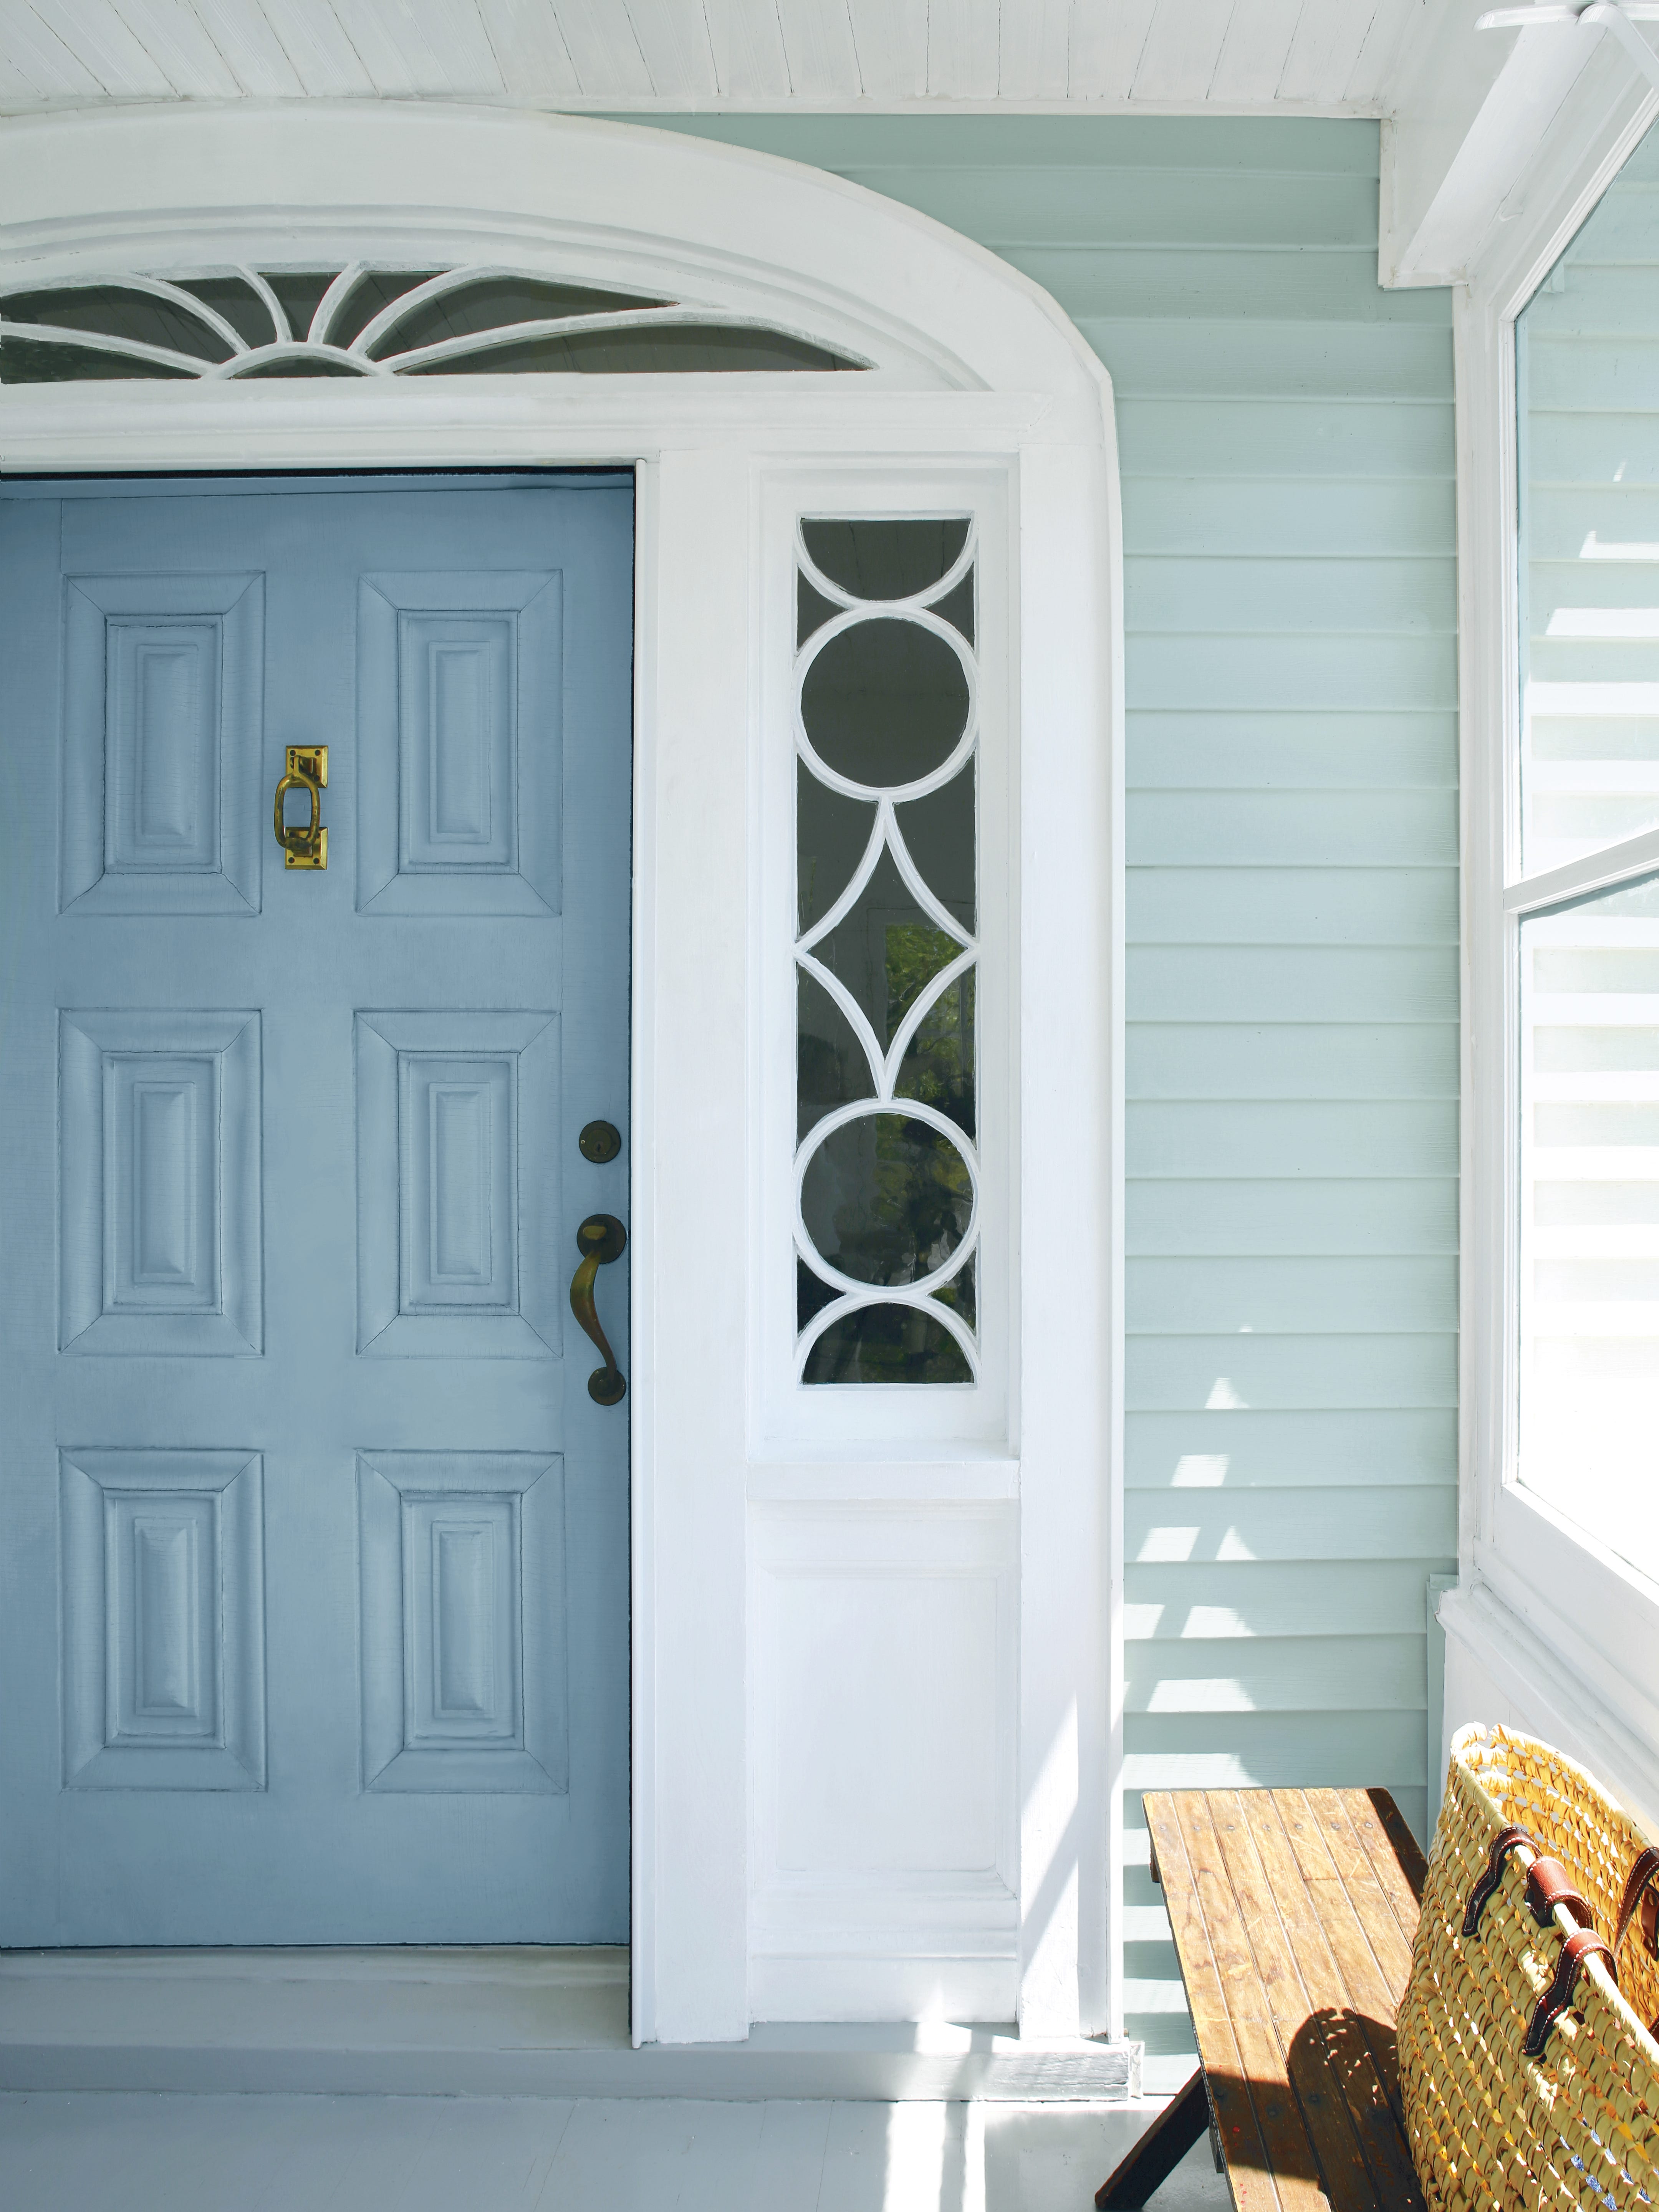 10 Exterior Paint Colors That Will Refresh Your House for Spring